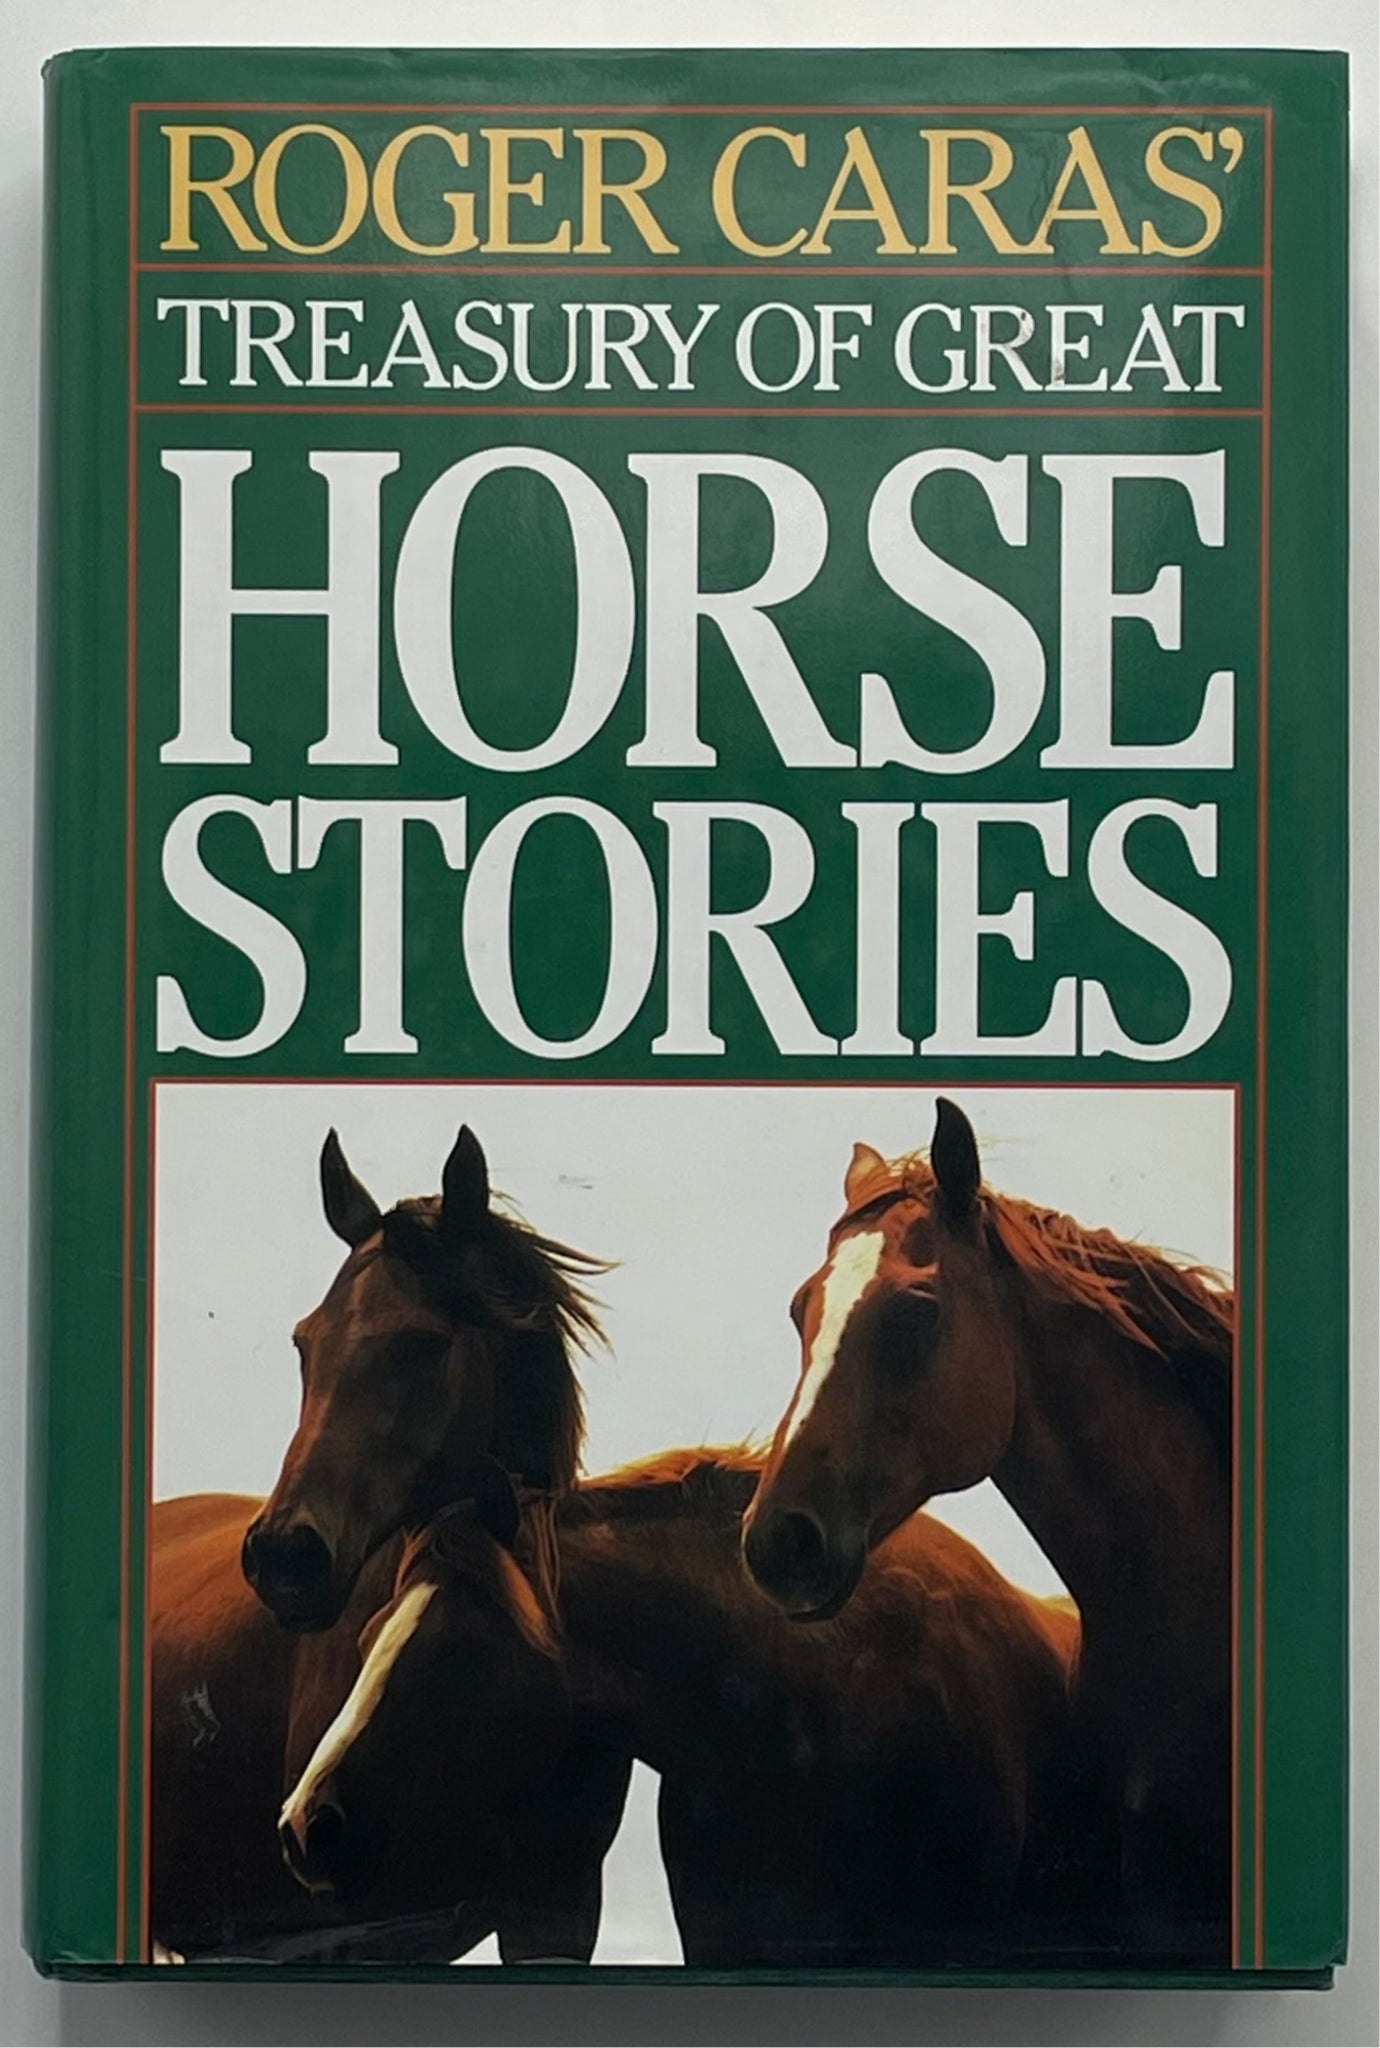 Treasury of Great Horse Stories, Roger Caras